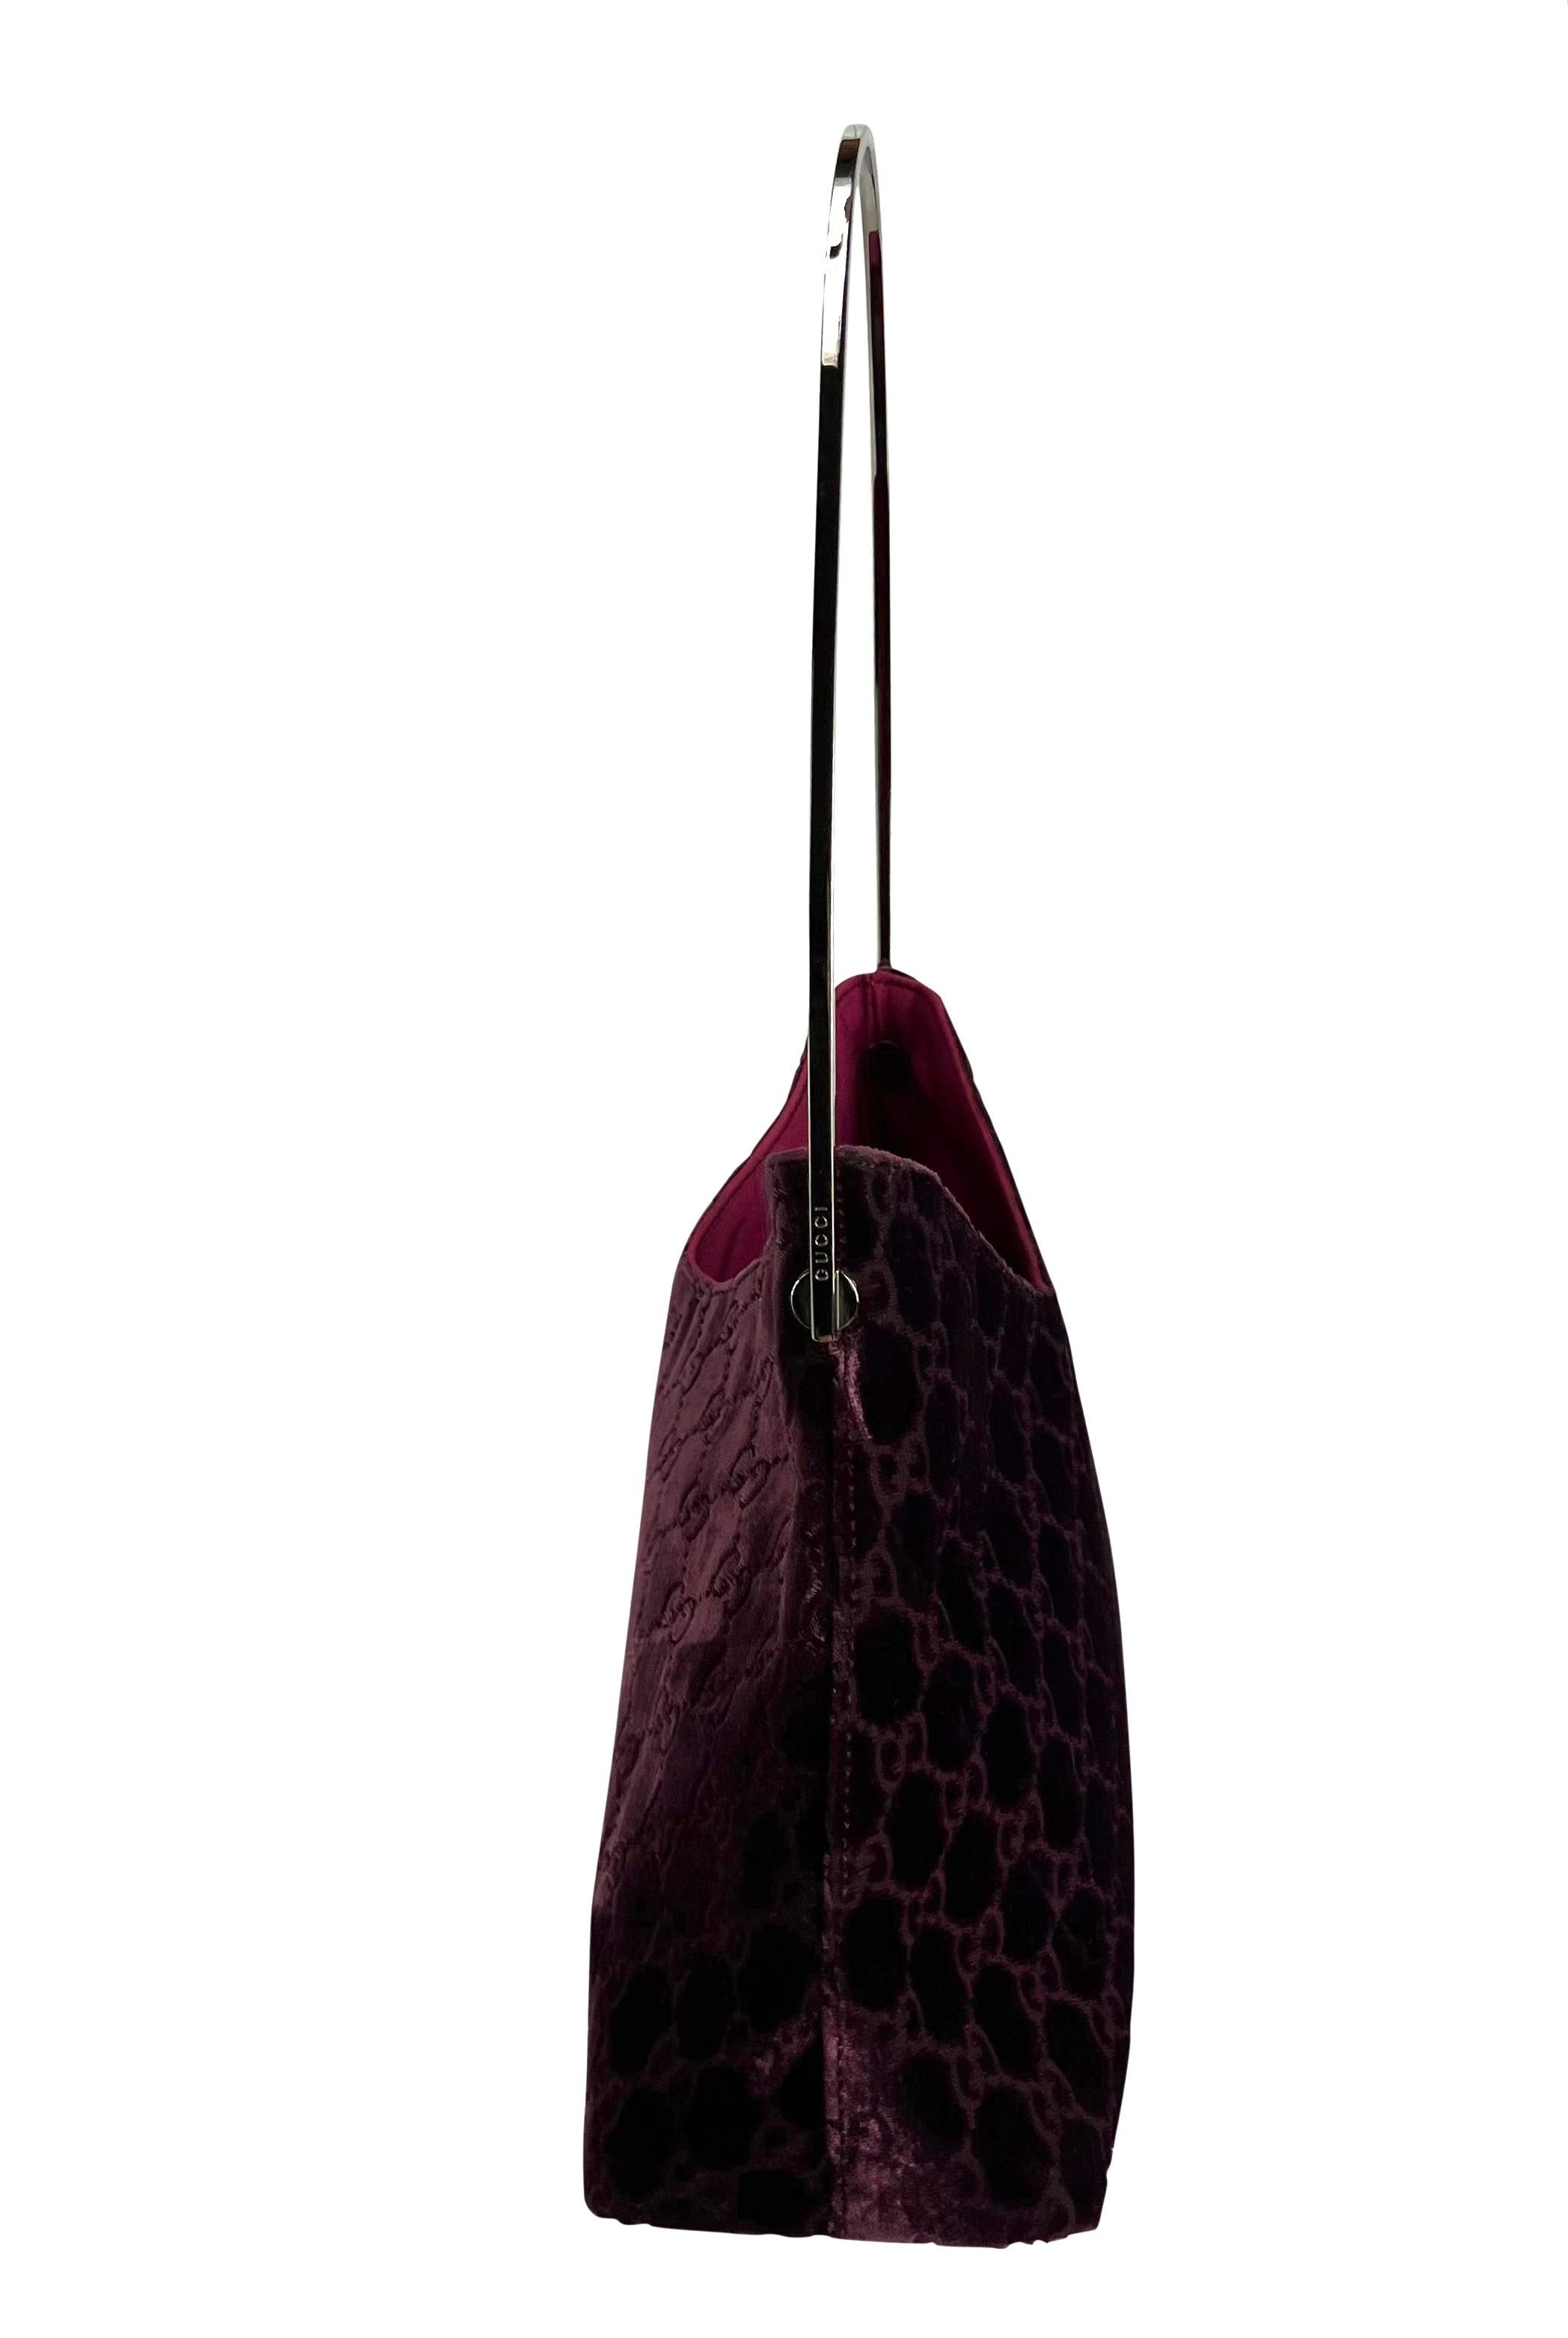 Presenting an iconic burgundy Gucci 'GG' monogram bucket bag, designed by Tom Ford. From the Fall/Winter 1997 collection, this fabulous bag is constructed of a deep purple/burgundy silk velvet body and is made complete with a silver plated handle.